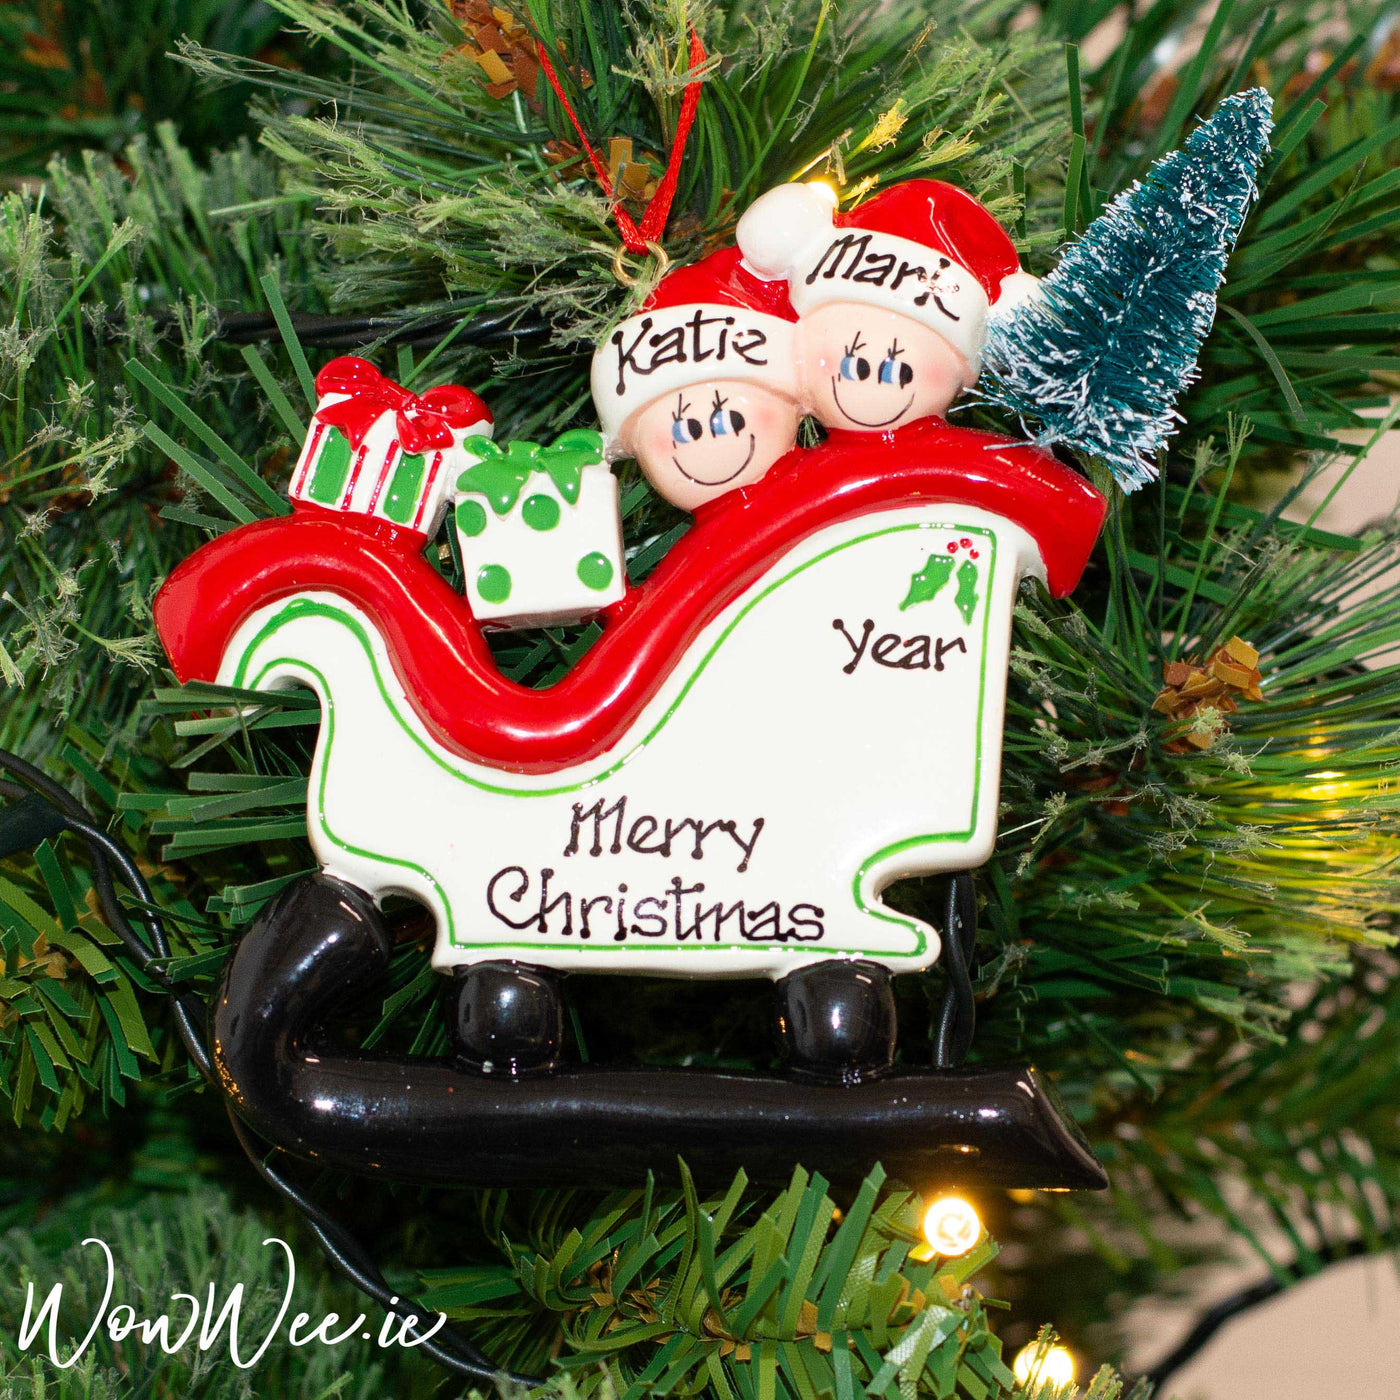 Personalised Christmas Ornaments | Personalised Christmas Tree Decorations | Personalised Christmas Gifts | WowWee.ie